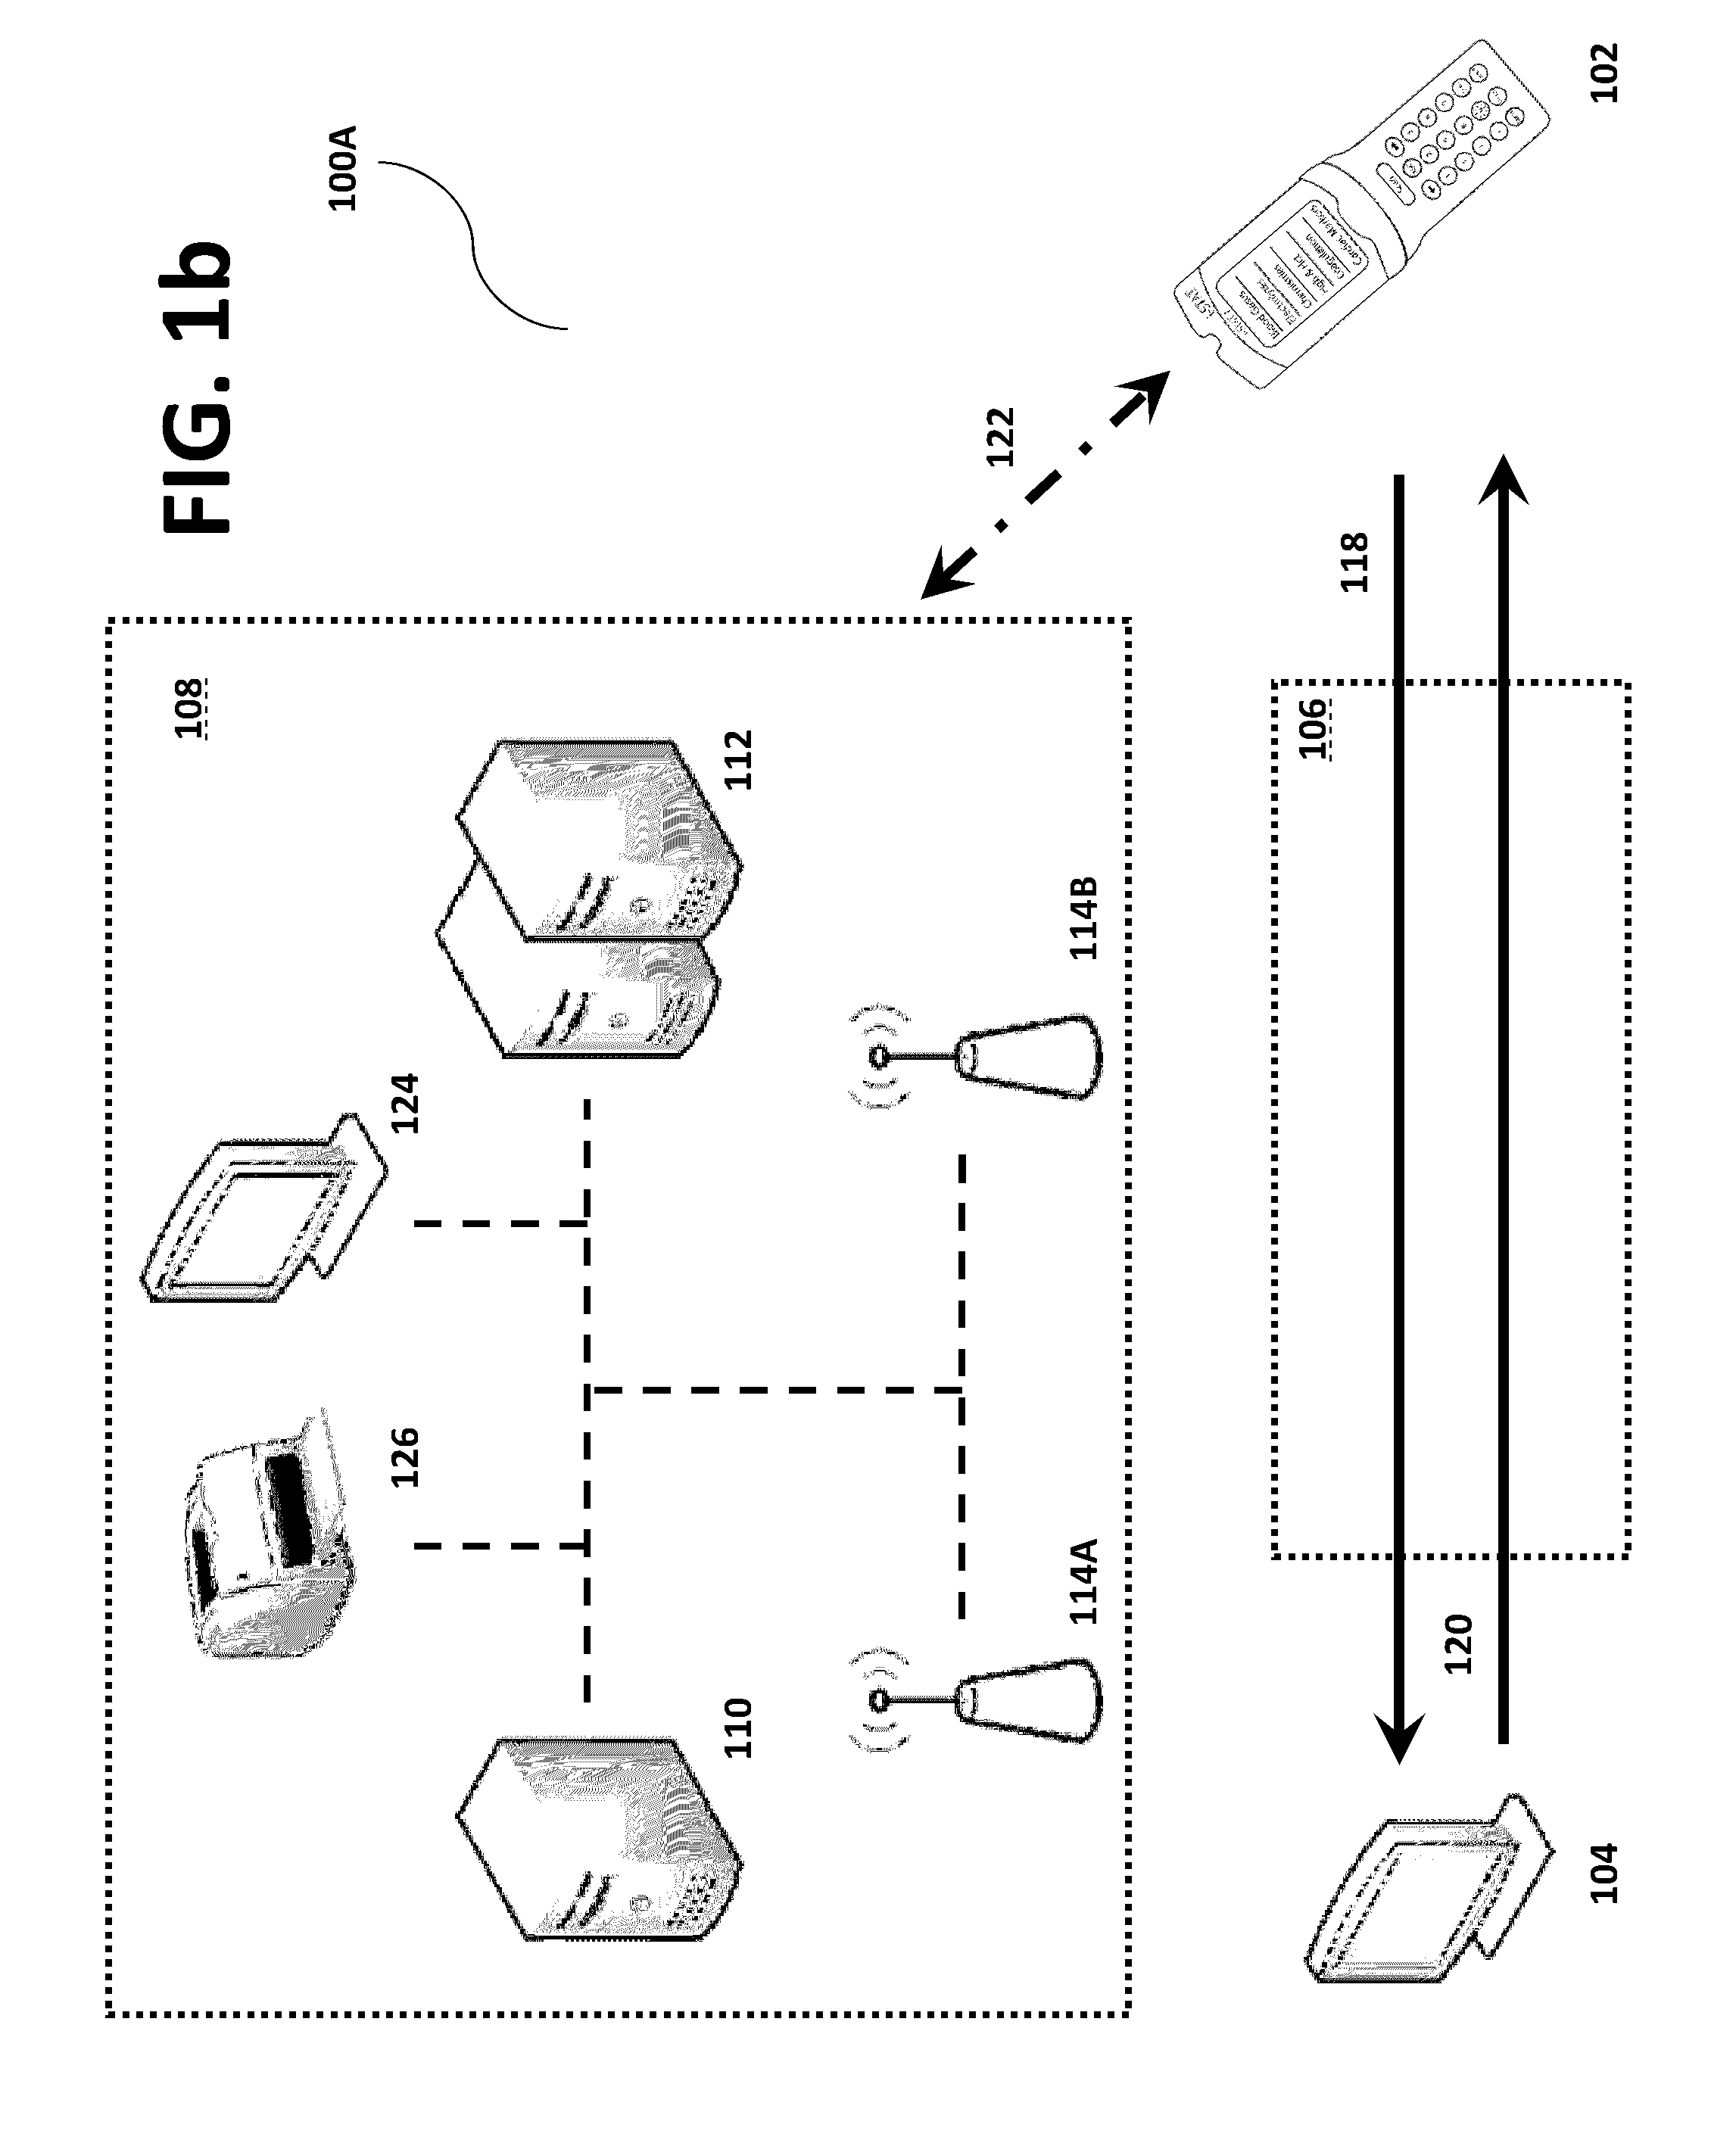 Systems, methods and analyzers for establishing a secure wireless network in point of care testing